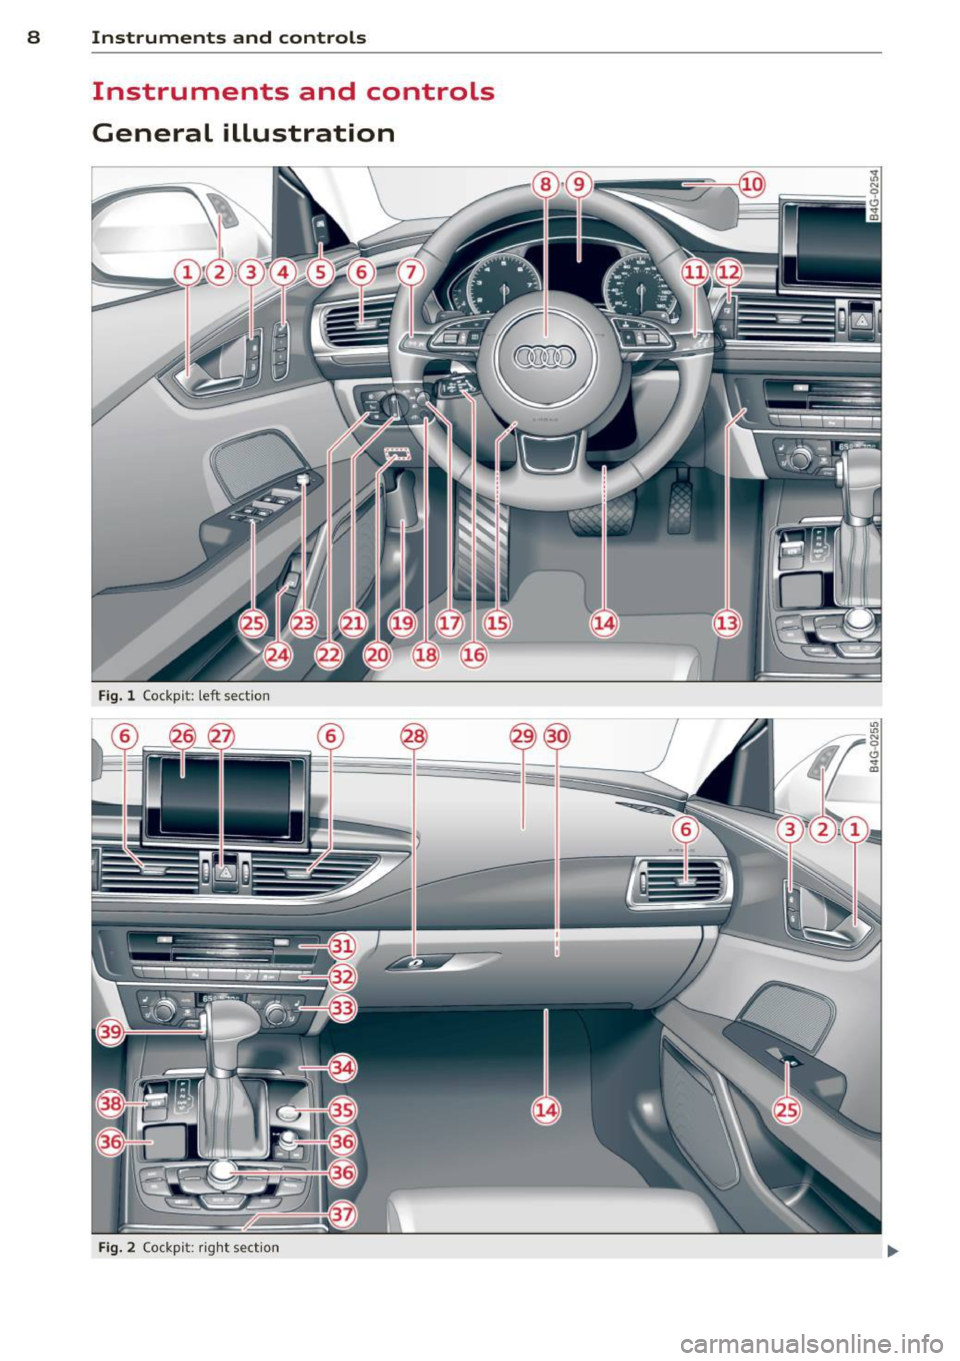 AUDI A7 2012  Owners Manual 8  Instruments and controls 
Instruments  and  controls 
General  illustration 
Fig. l Cockp it:  left  sect io n 
Fig. 2 Co ck pi t: ri ght  sect io n  